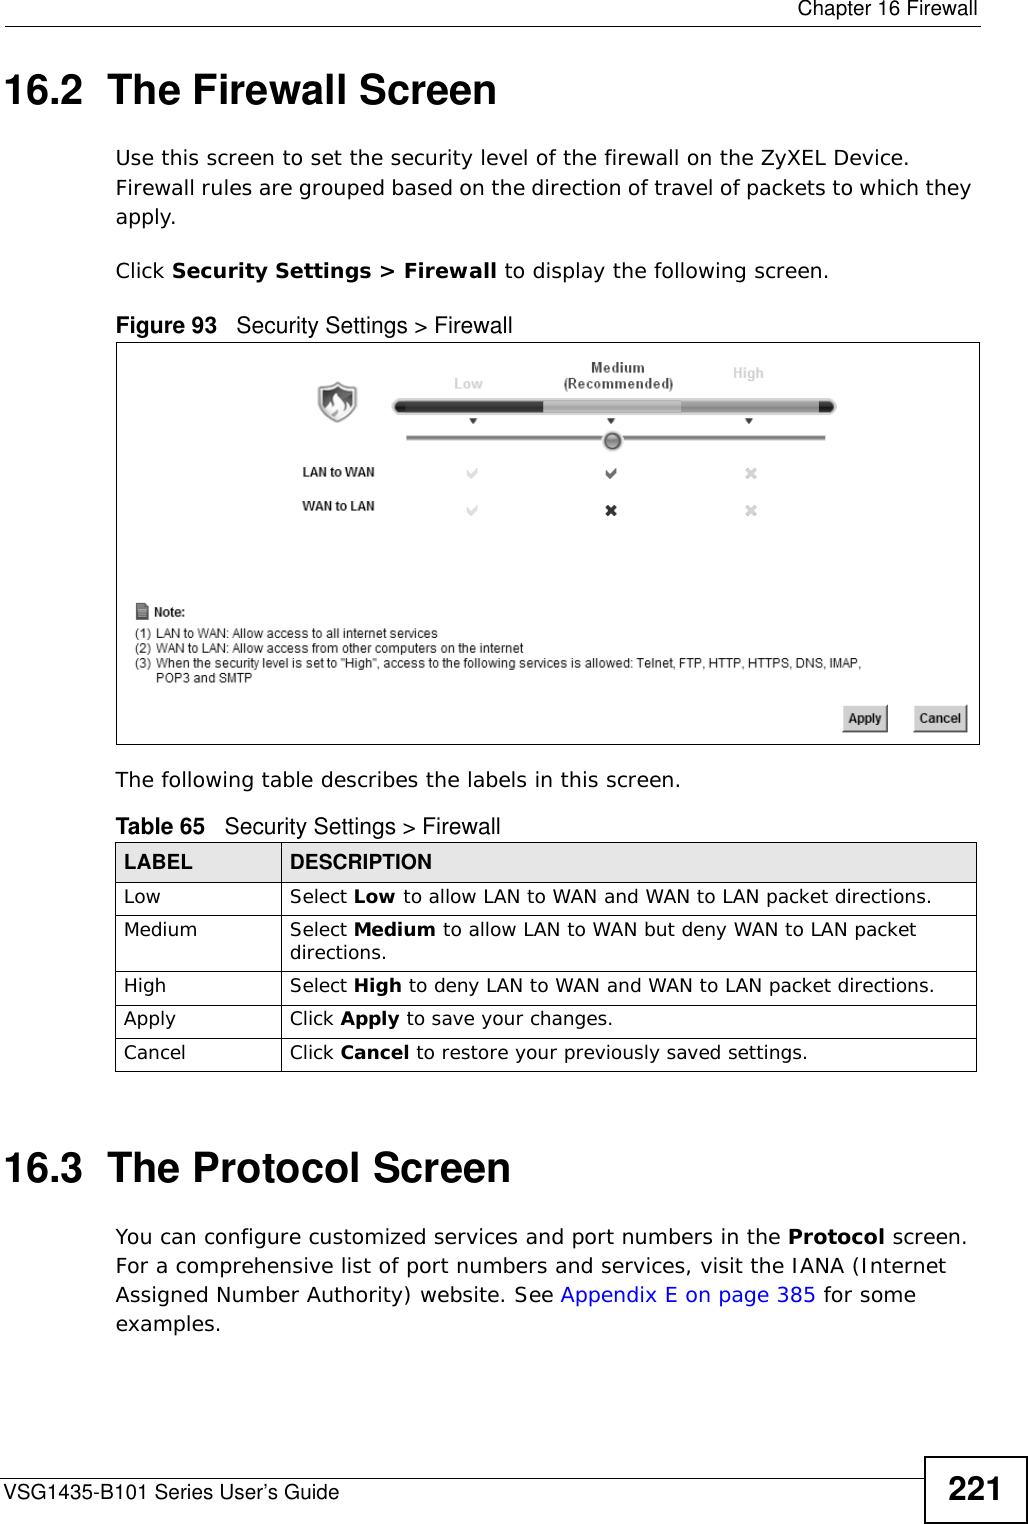  Chapter 16 FirewallVSG1435-B101 Series User’s Guide 22116.2  The Firewall ScreenUse this screen to set the security level of the firewall on the ZyXEL Device. Firewall rules are grouped based on the direction of travel of packets to which they apply. Click Security Settings &gt; Firewall to display the following screen. Figure 93   Security Settings &gt; FirewallThe following table describes the labels in this screen.16.3  The Protocol Screen You can configure customized services and port numbers in the Protocol screen. For a comprehensive list of port numbers and services, visit the IANA (Internet Assigned Number Authority) website. See Appendix E on page 385 for some examples. Table 65   Security Settings &gt; FirewallLABEL DESCRIPTIONLow Select Low to allow LAN to WAN and WAN to LAN packet directions.Medium Select Medium to allow LAN to WAN but deny WAN to LAN packet directions.High Select High to deny LAN to WAN and WAN to LAN packet directions.Apply Click Apply to save your changes.Cancel Click Cancel to restore your previously saved settings.